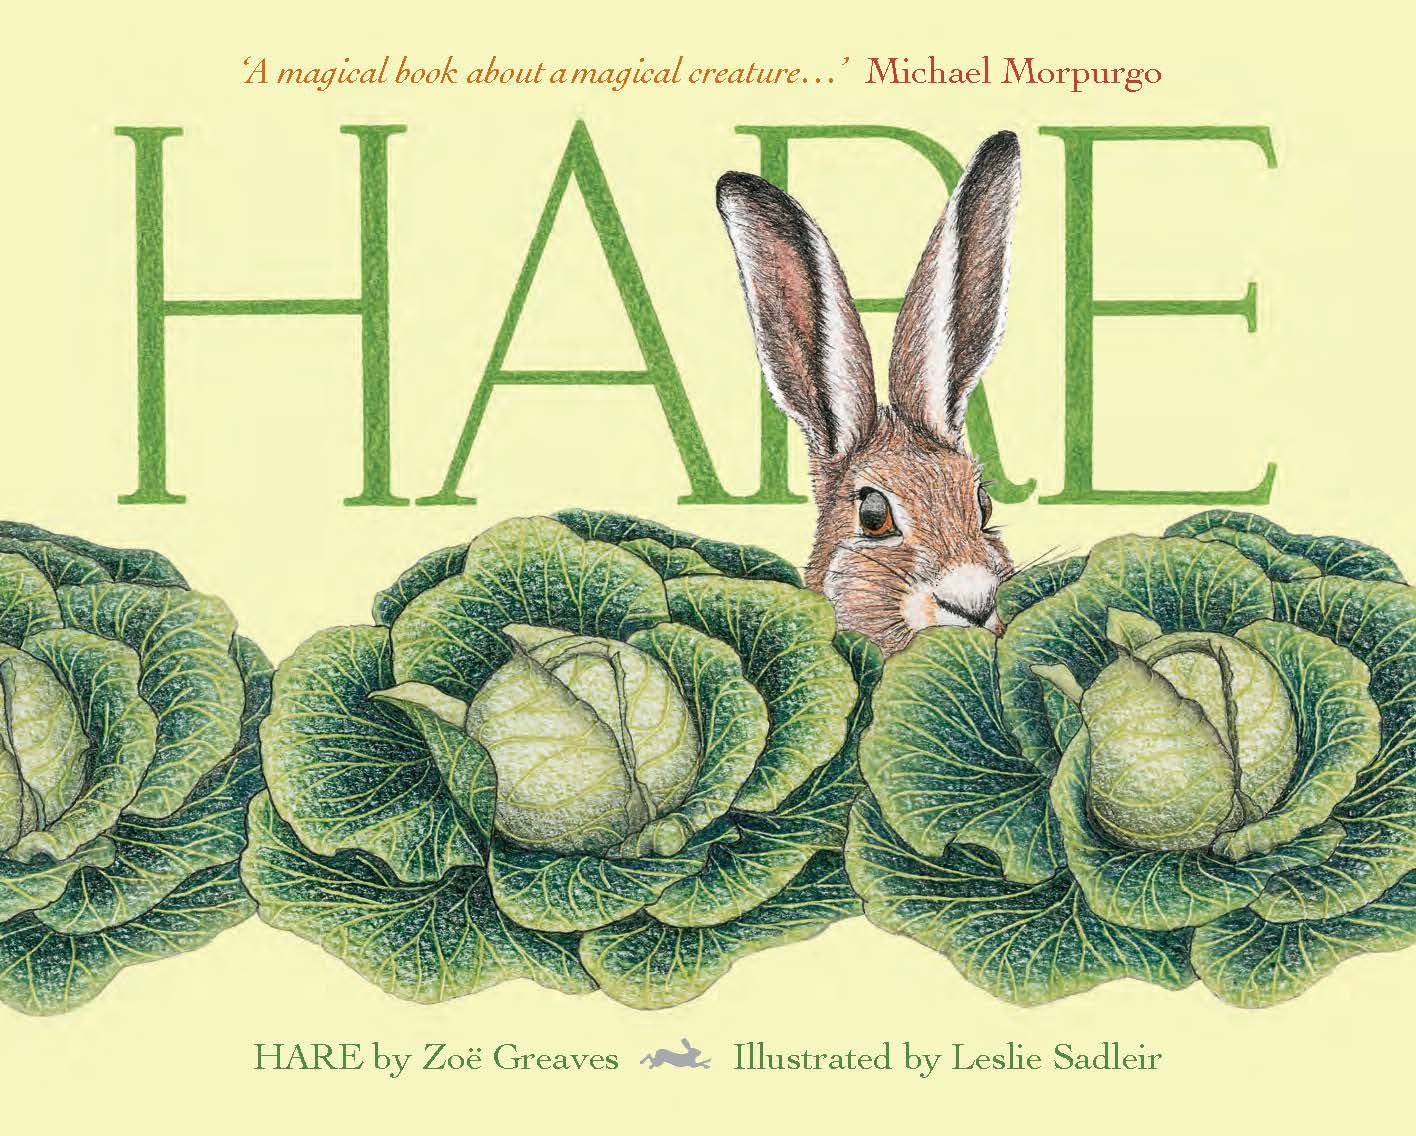 Hare by Zoe Greaves and Leslie Sadleir